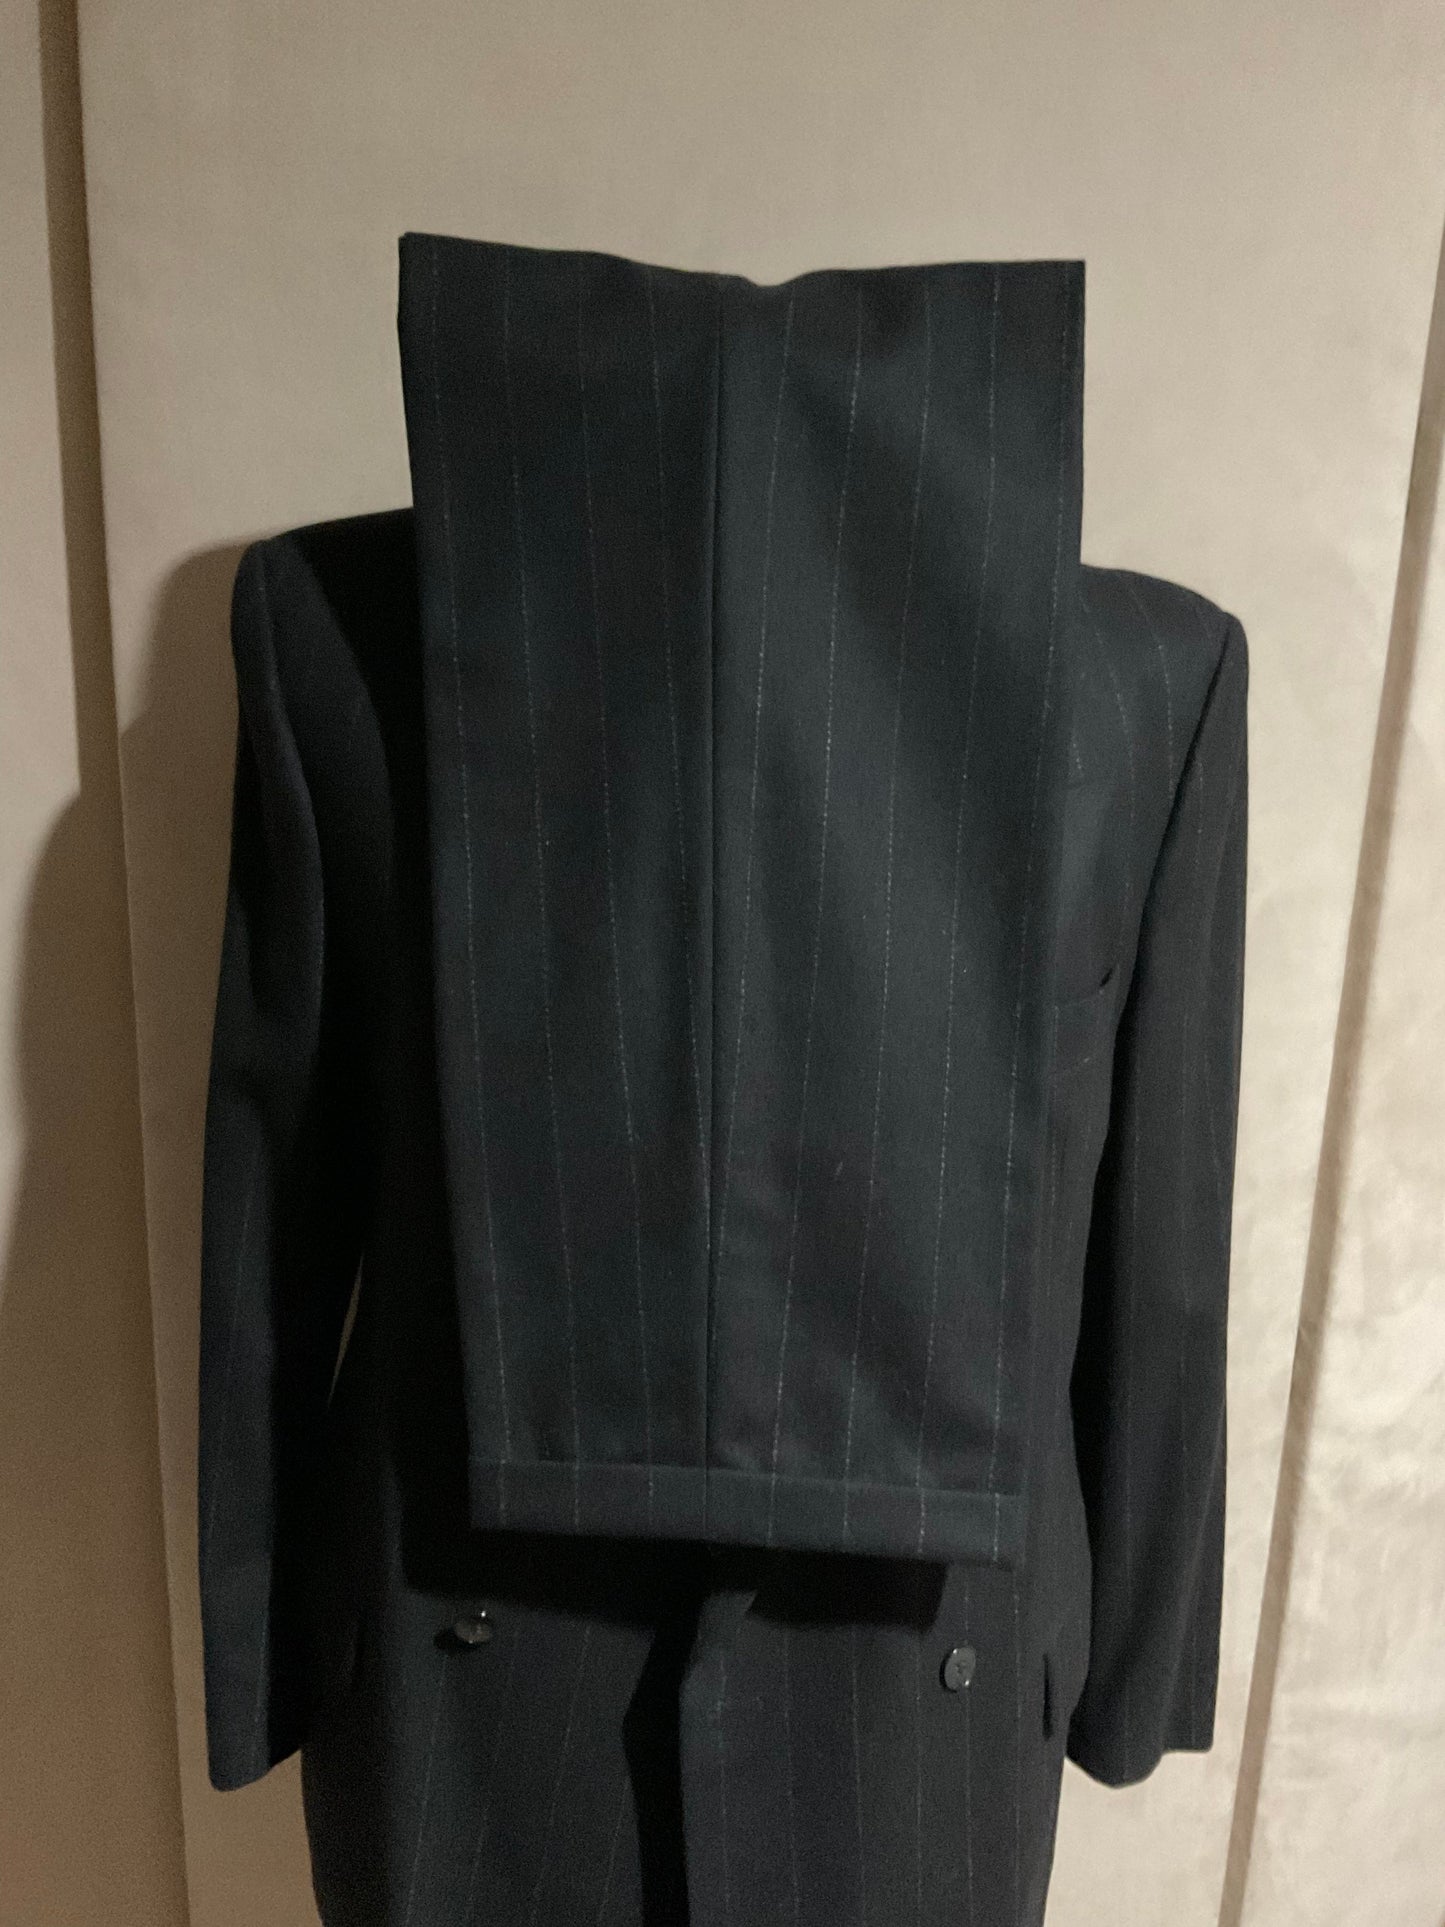 R P SUIT / DOUBLE BREASTED / BLACK STRIPE / 38 REG / MADE IN GERMANY